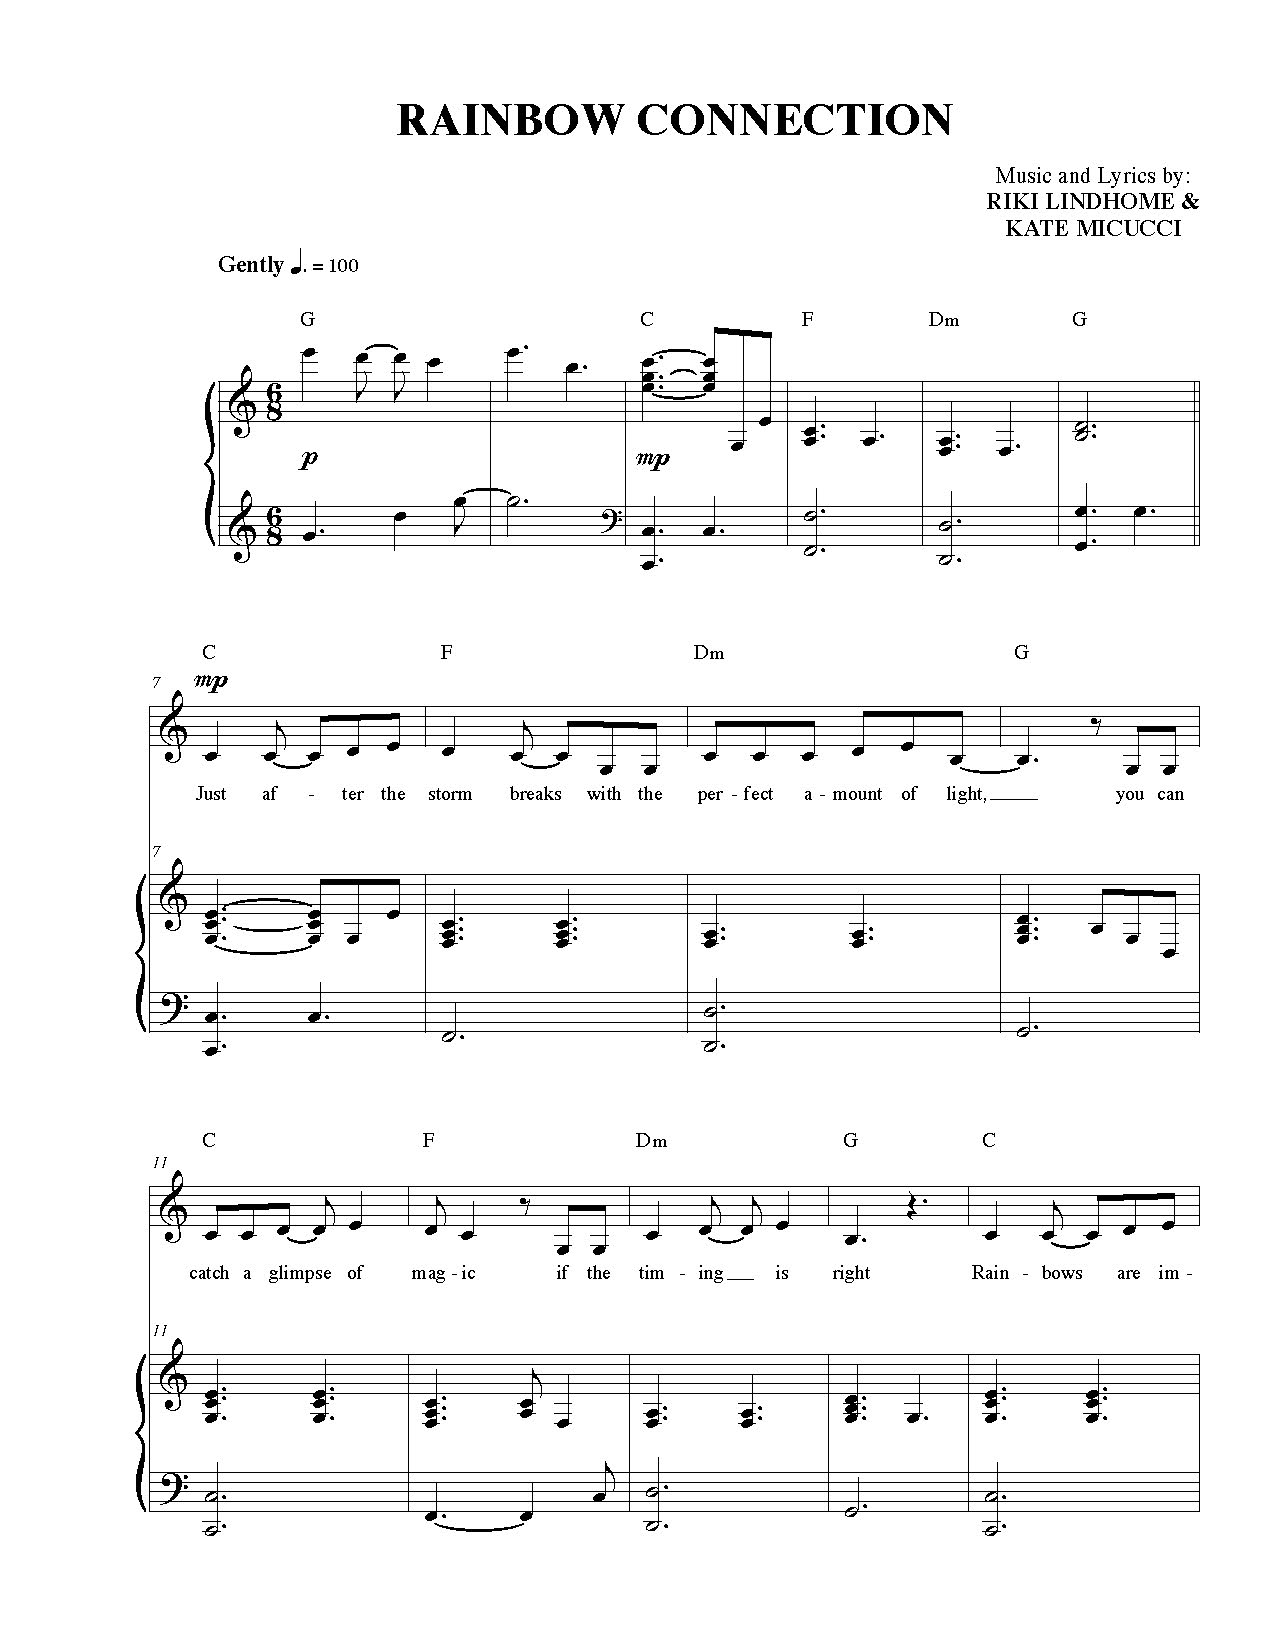 Rainbow Connection Chords Rainbow Connection Sheet Music Garfunkel And Oates